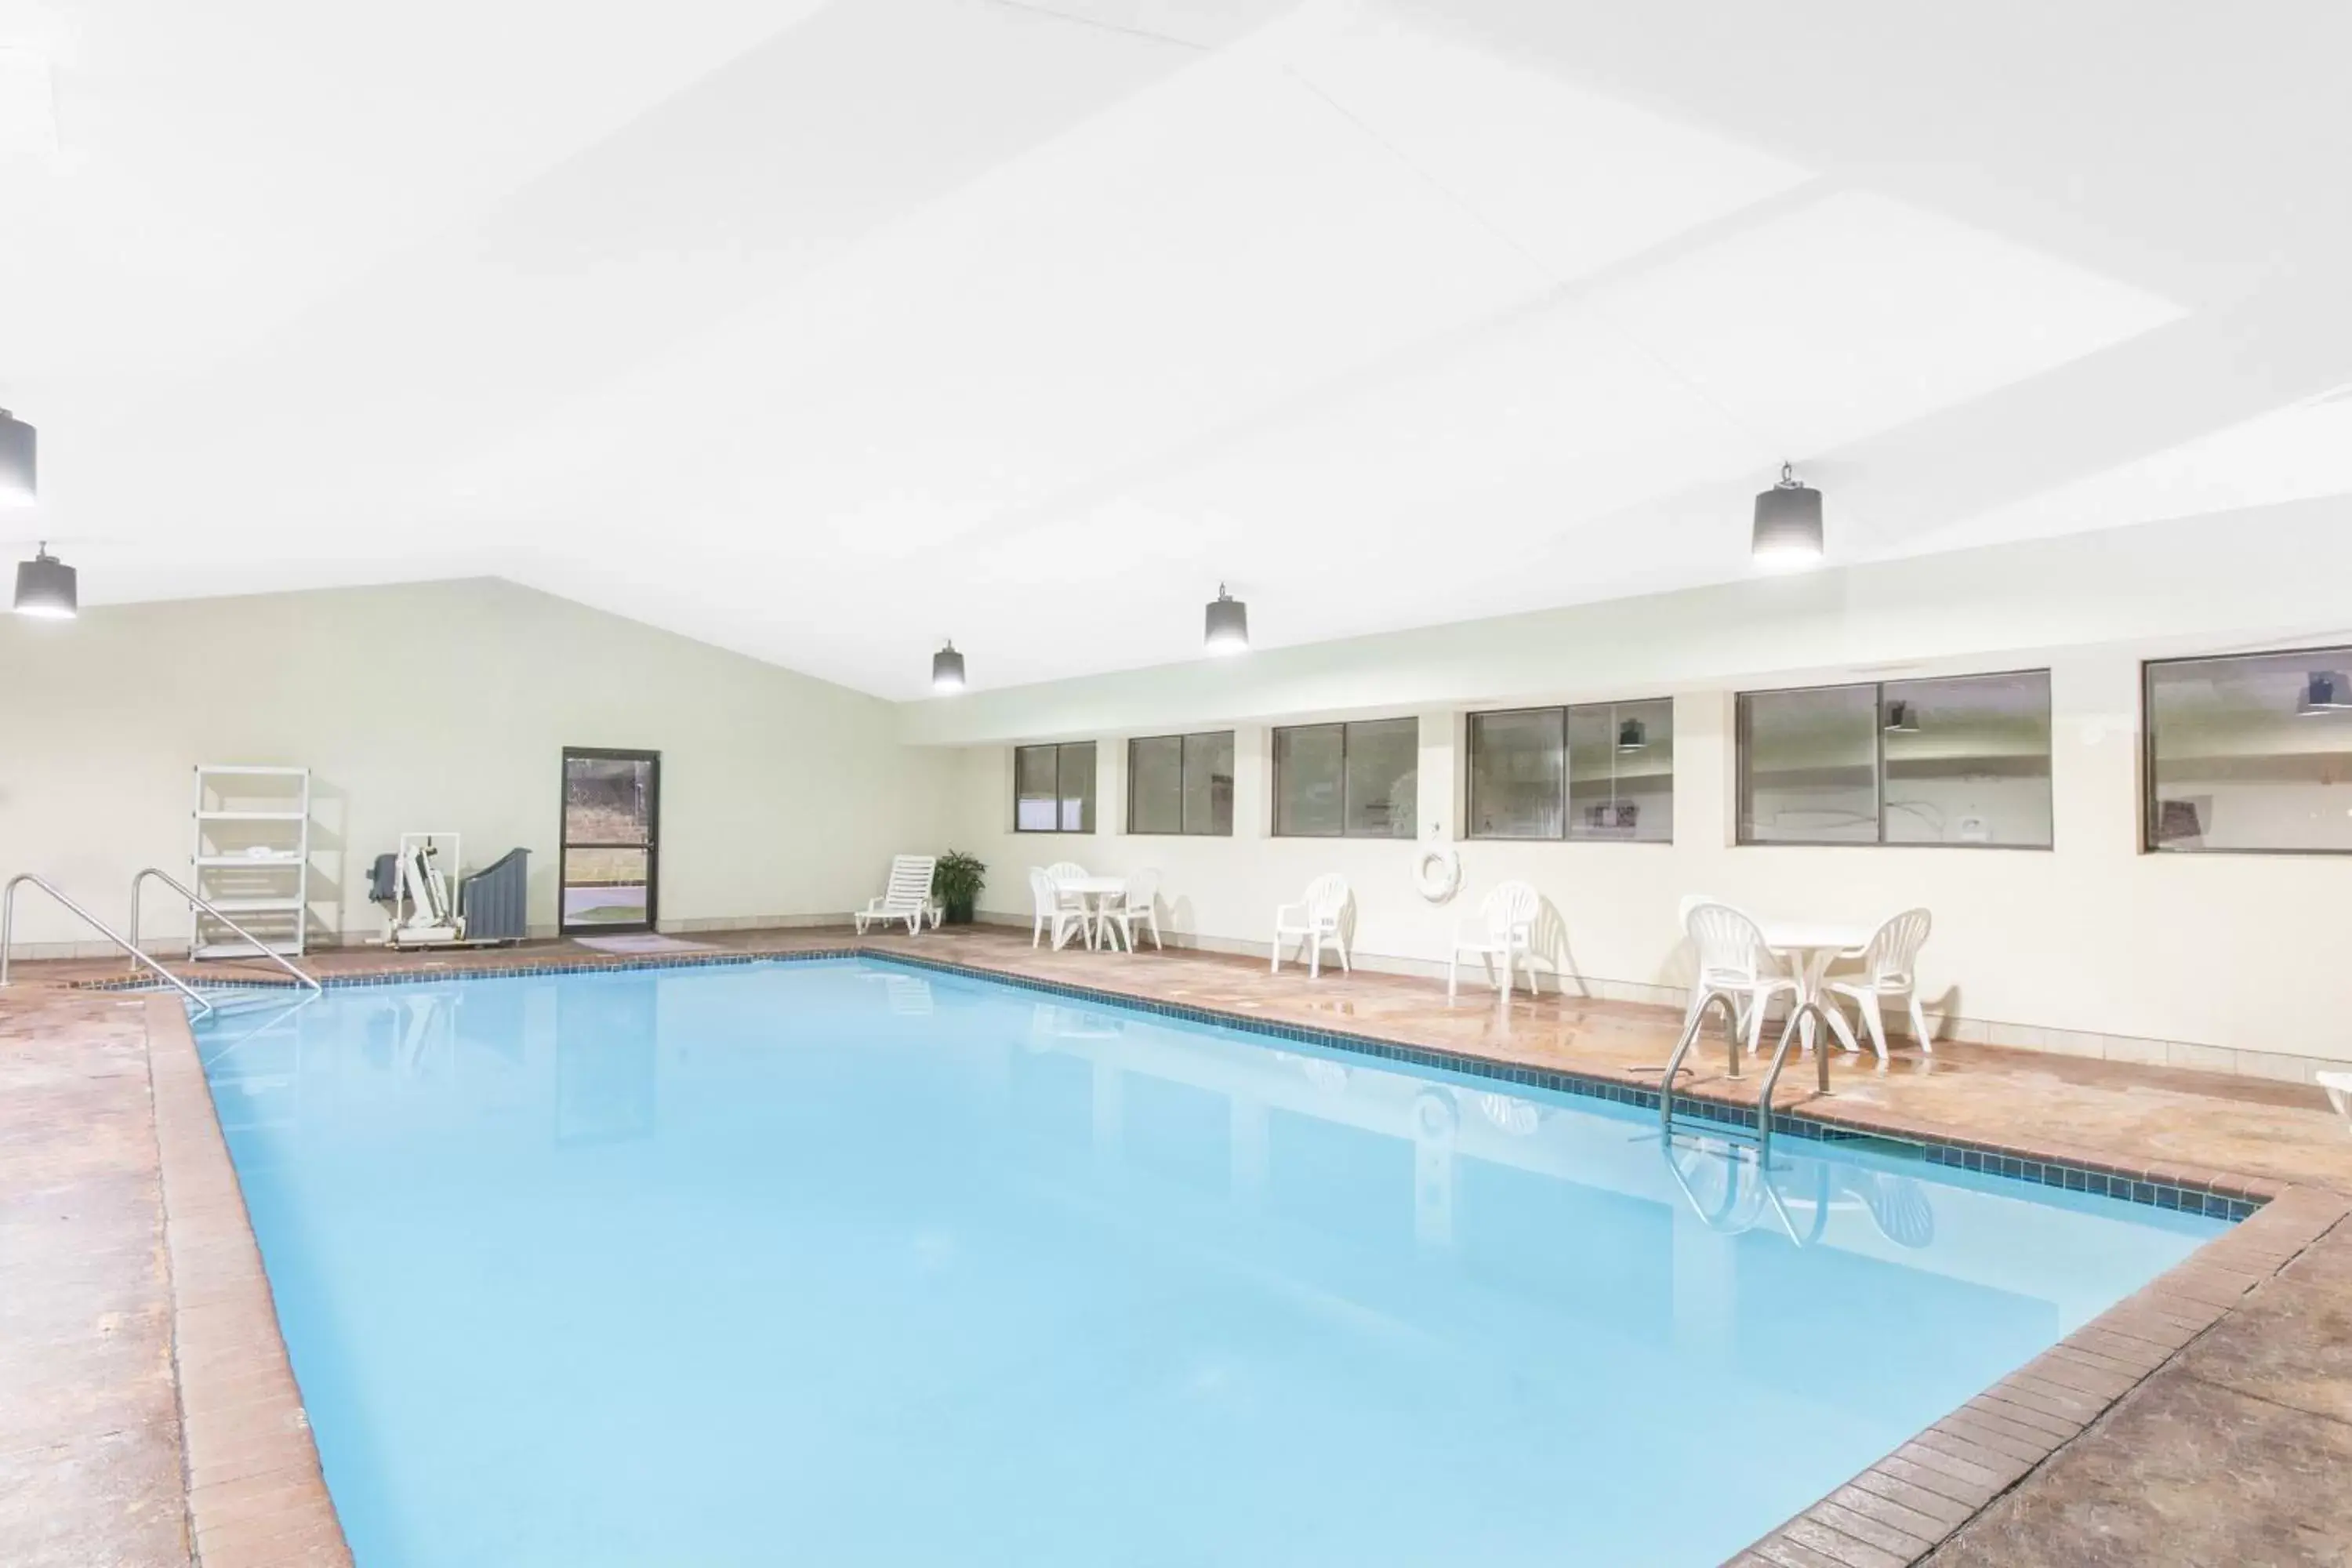 Swimming Pool in Hawthorn Suites Midwest City